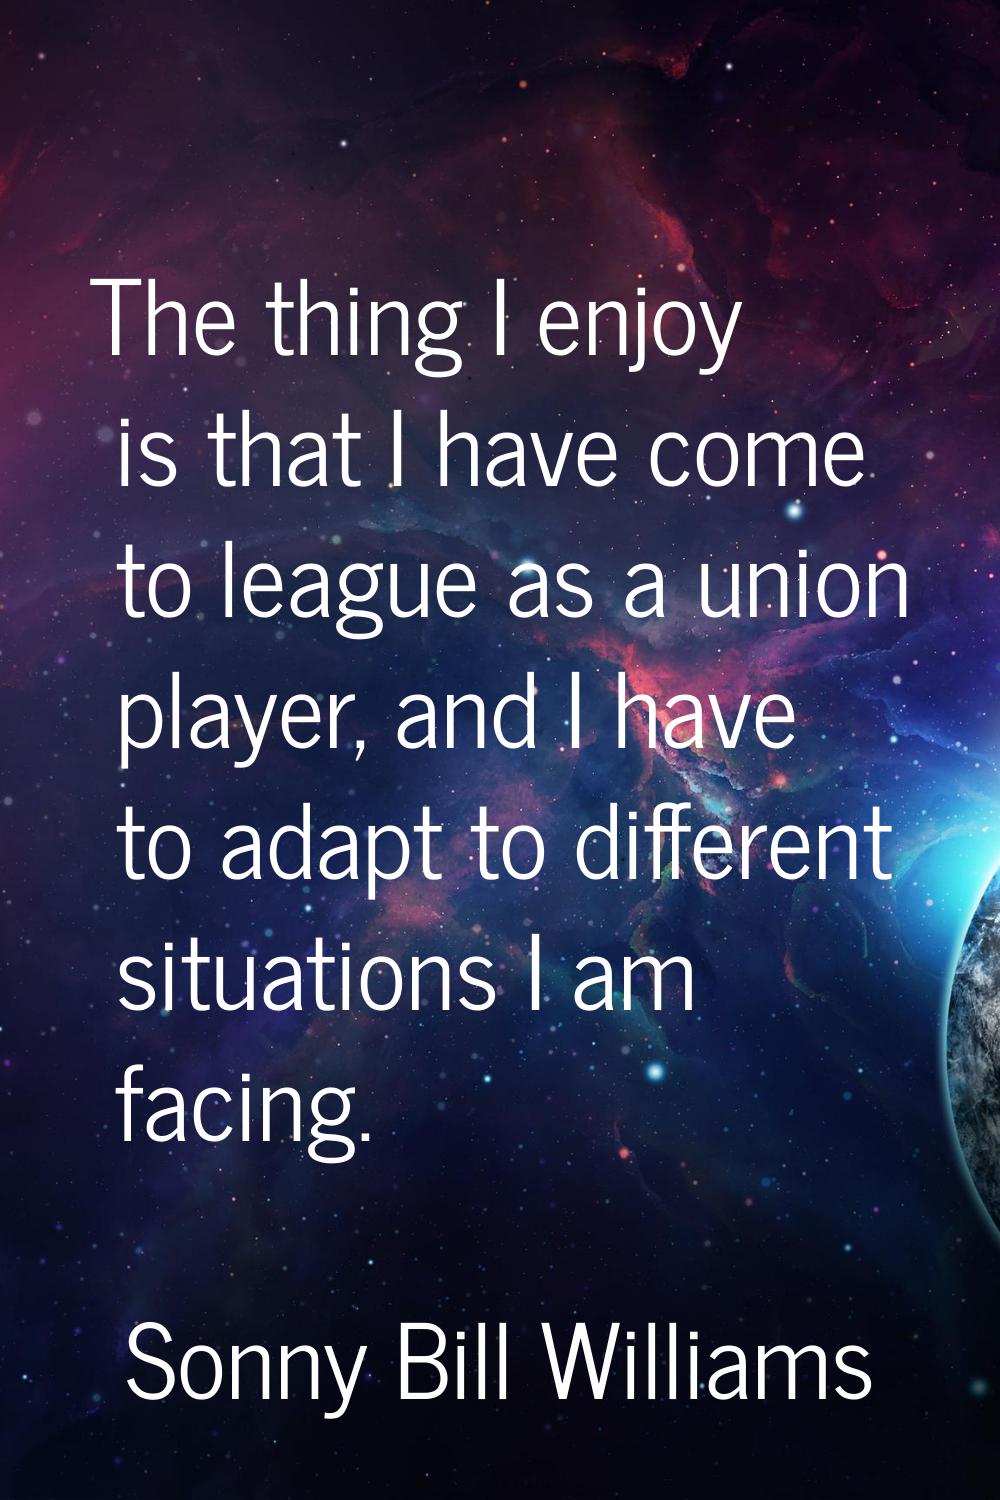 The thing I enjoy is that I have come to league as a union player, and I have to adapt to different